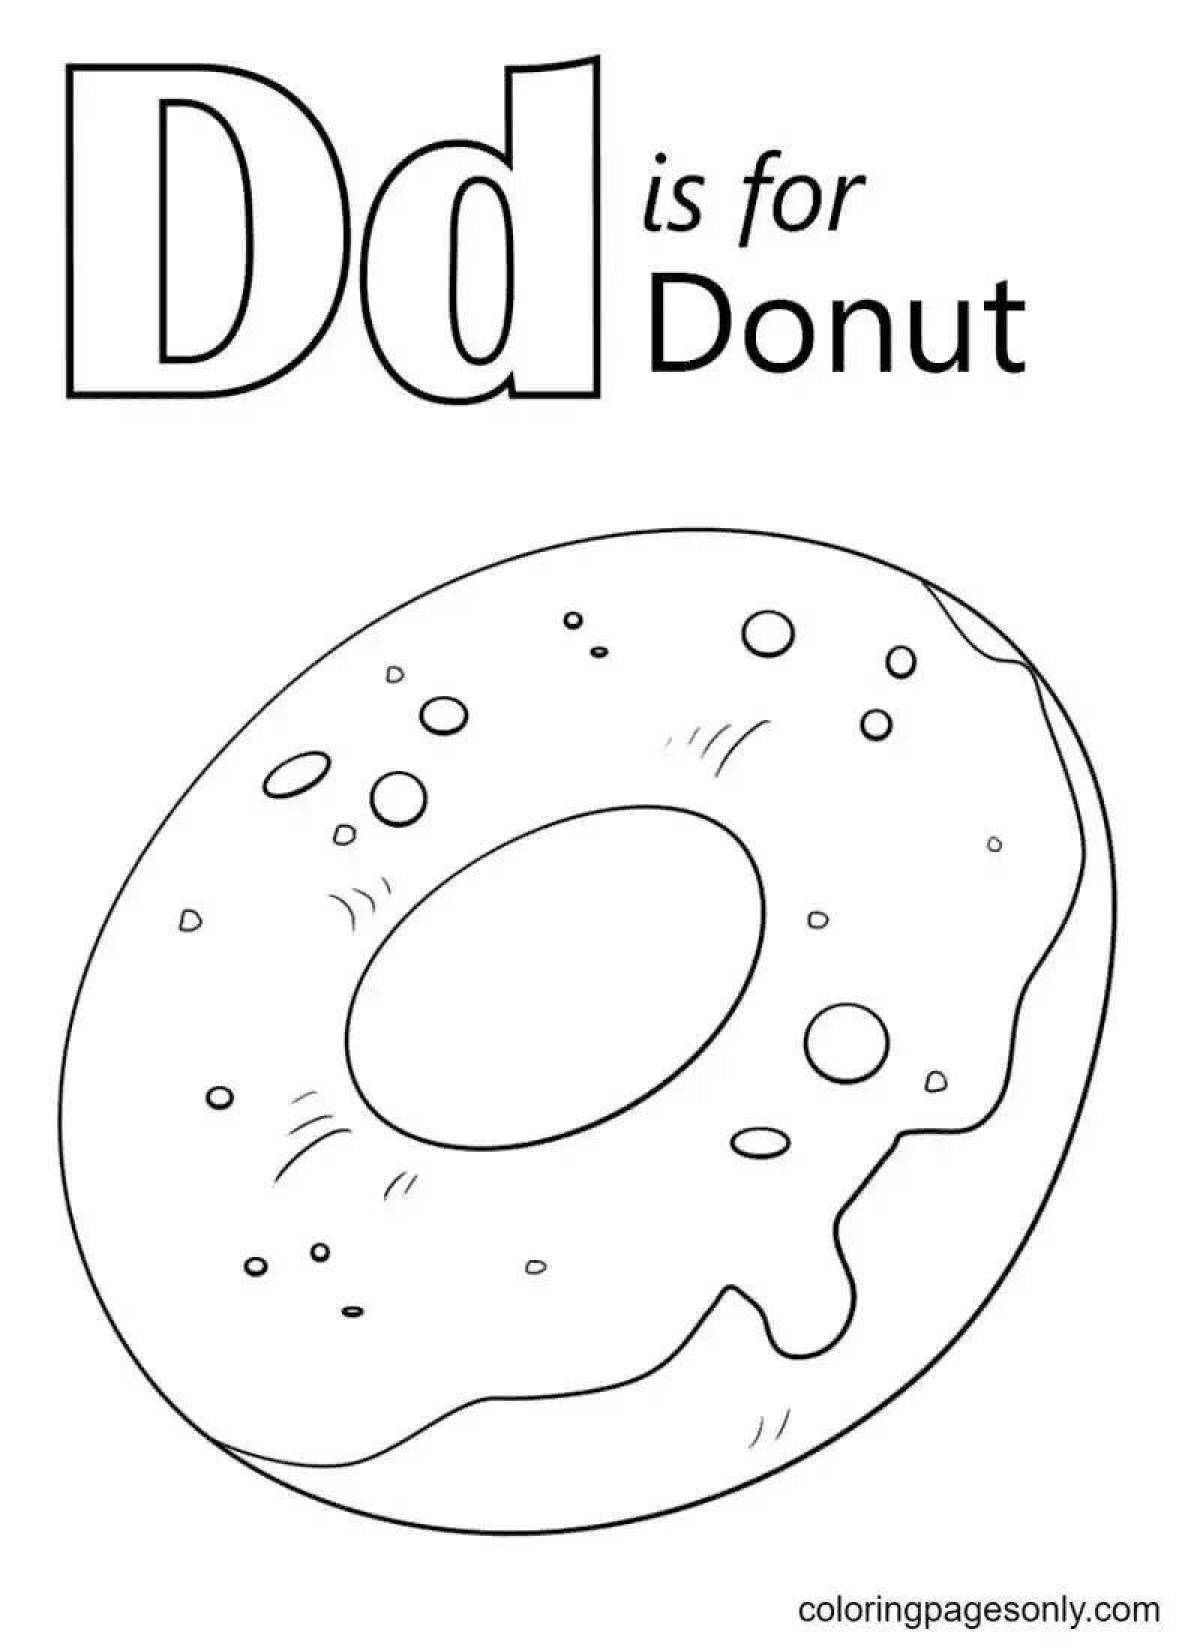 Delicious donuts coloring pages for girls